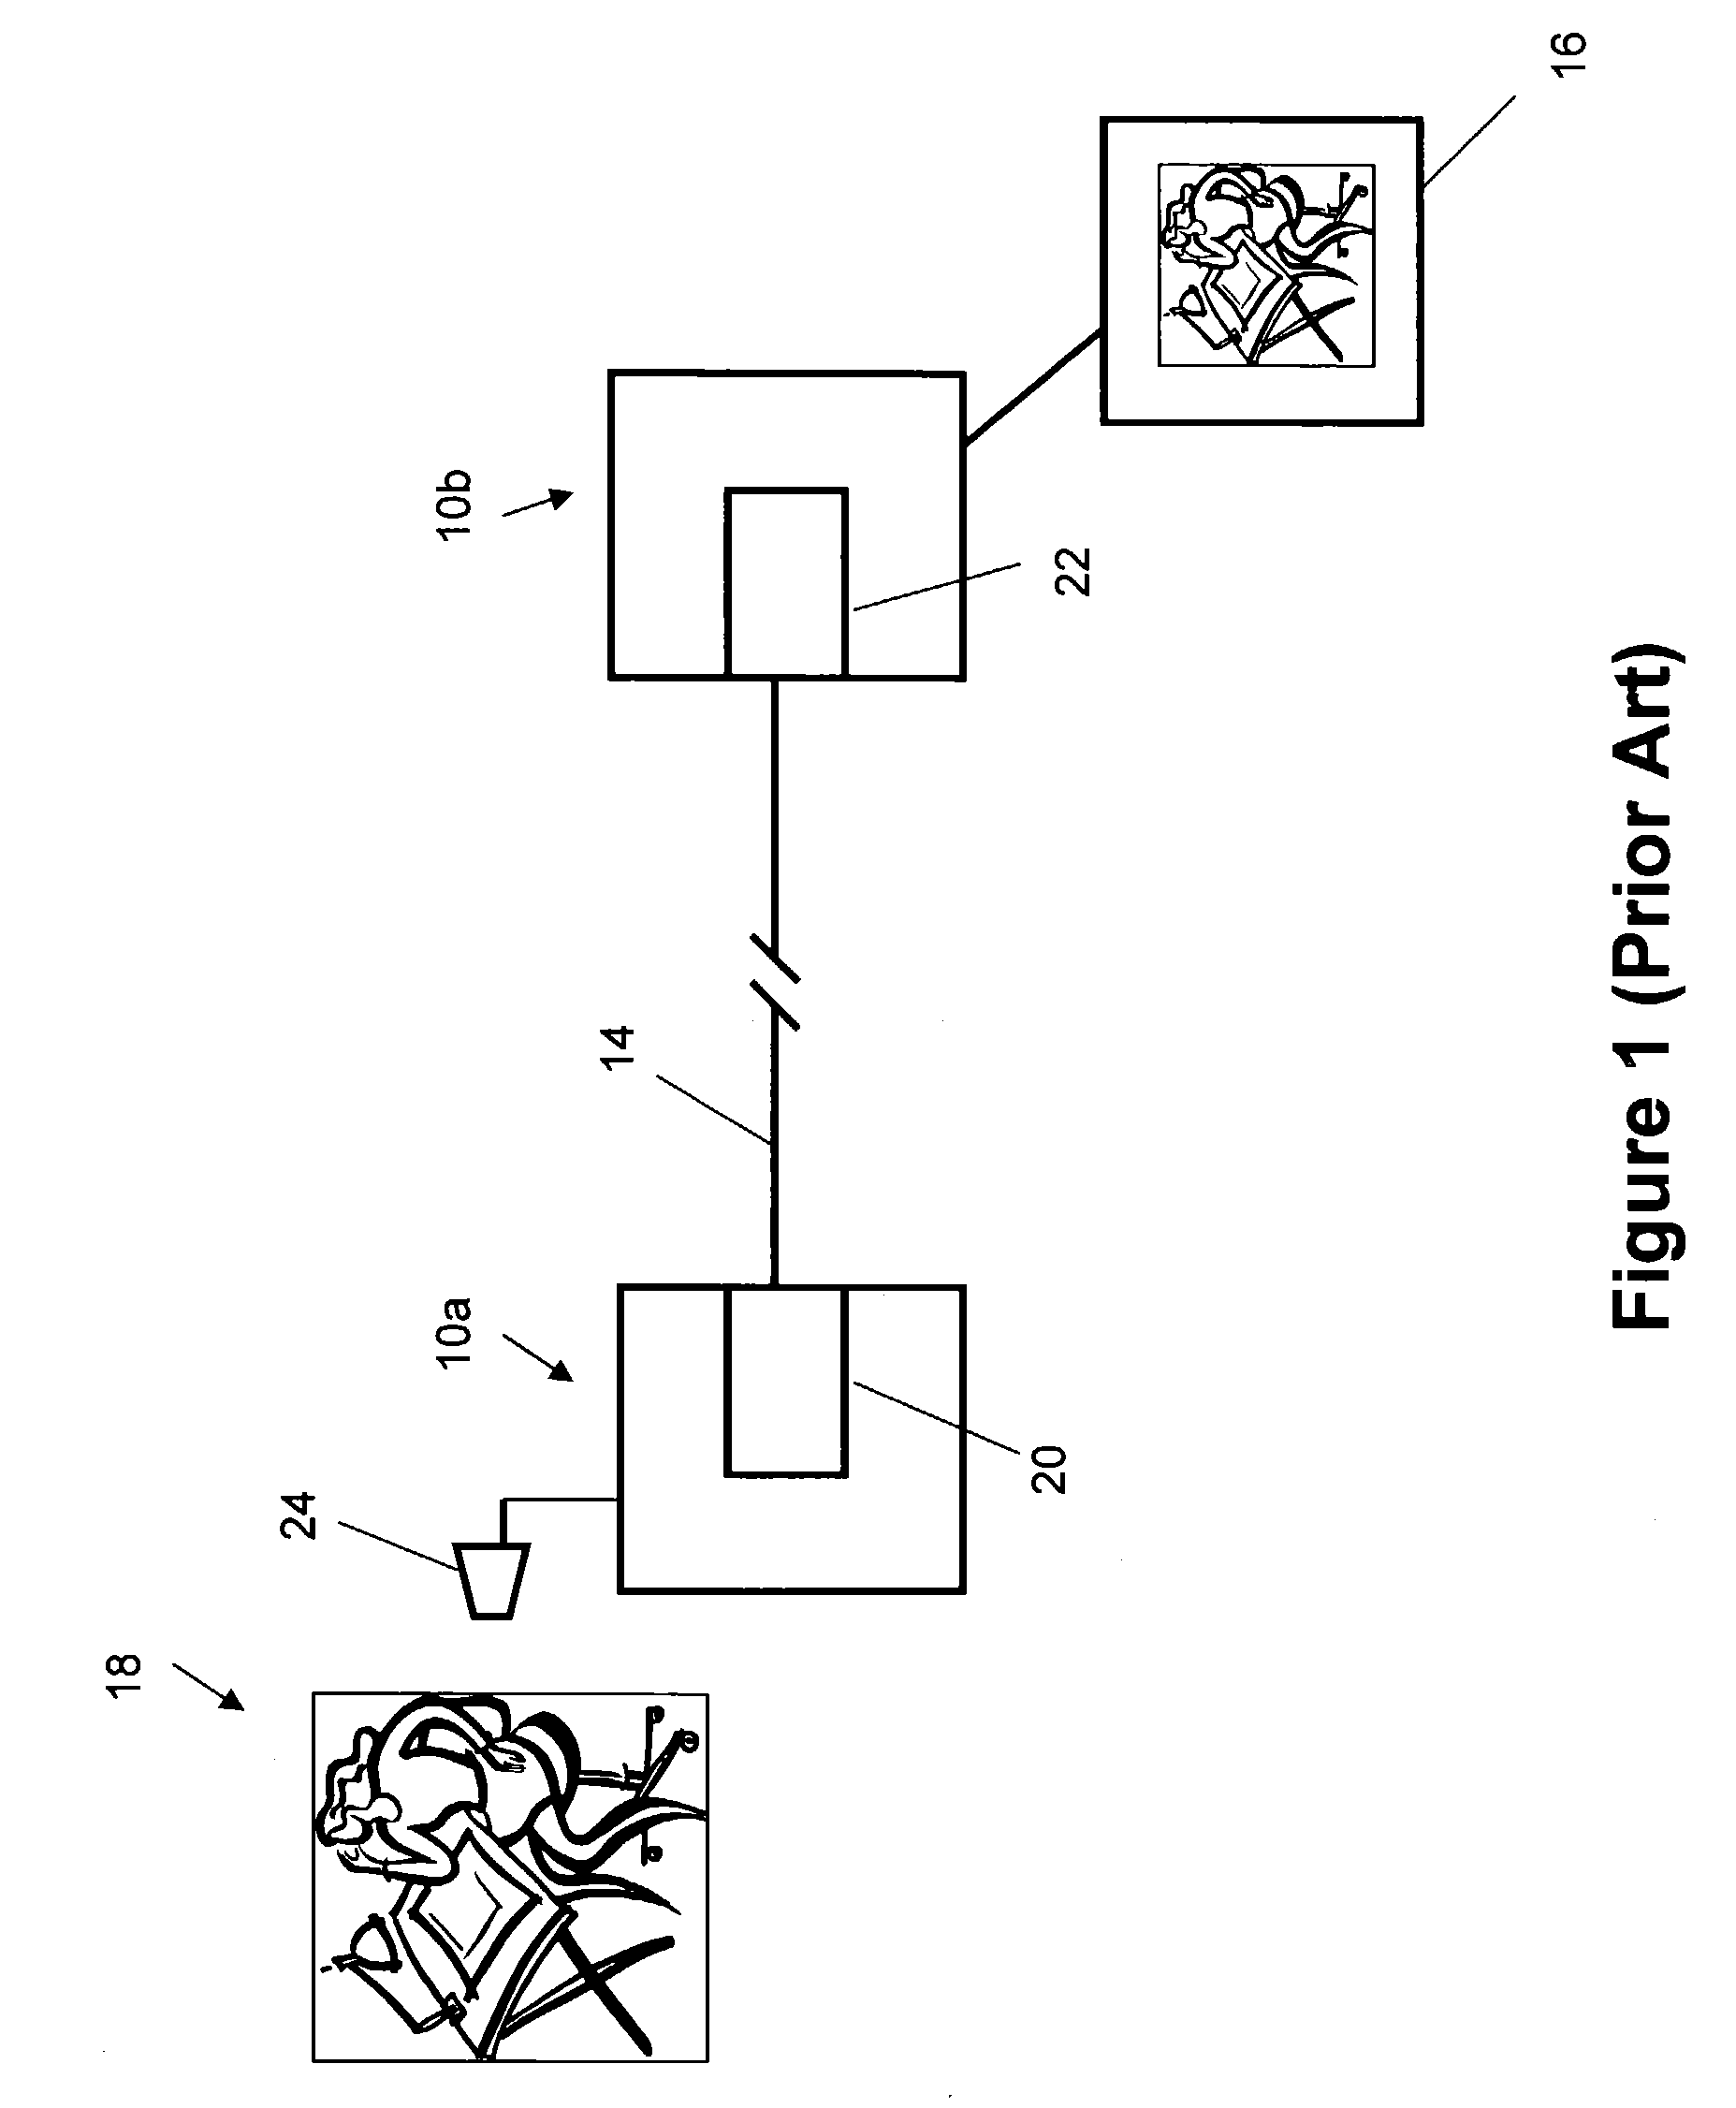 Methods for encoding or decoding in a videoconference system to reduce problems associated with noisy image acquisition